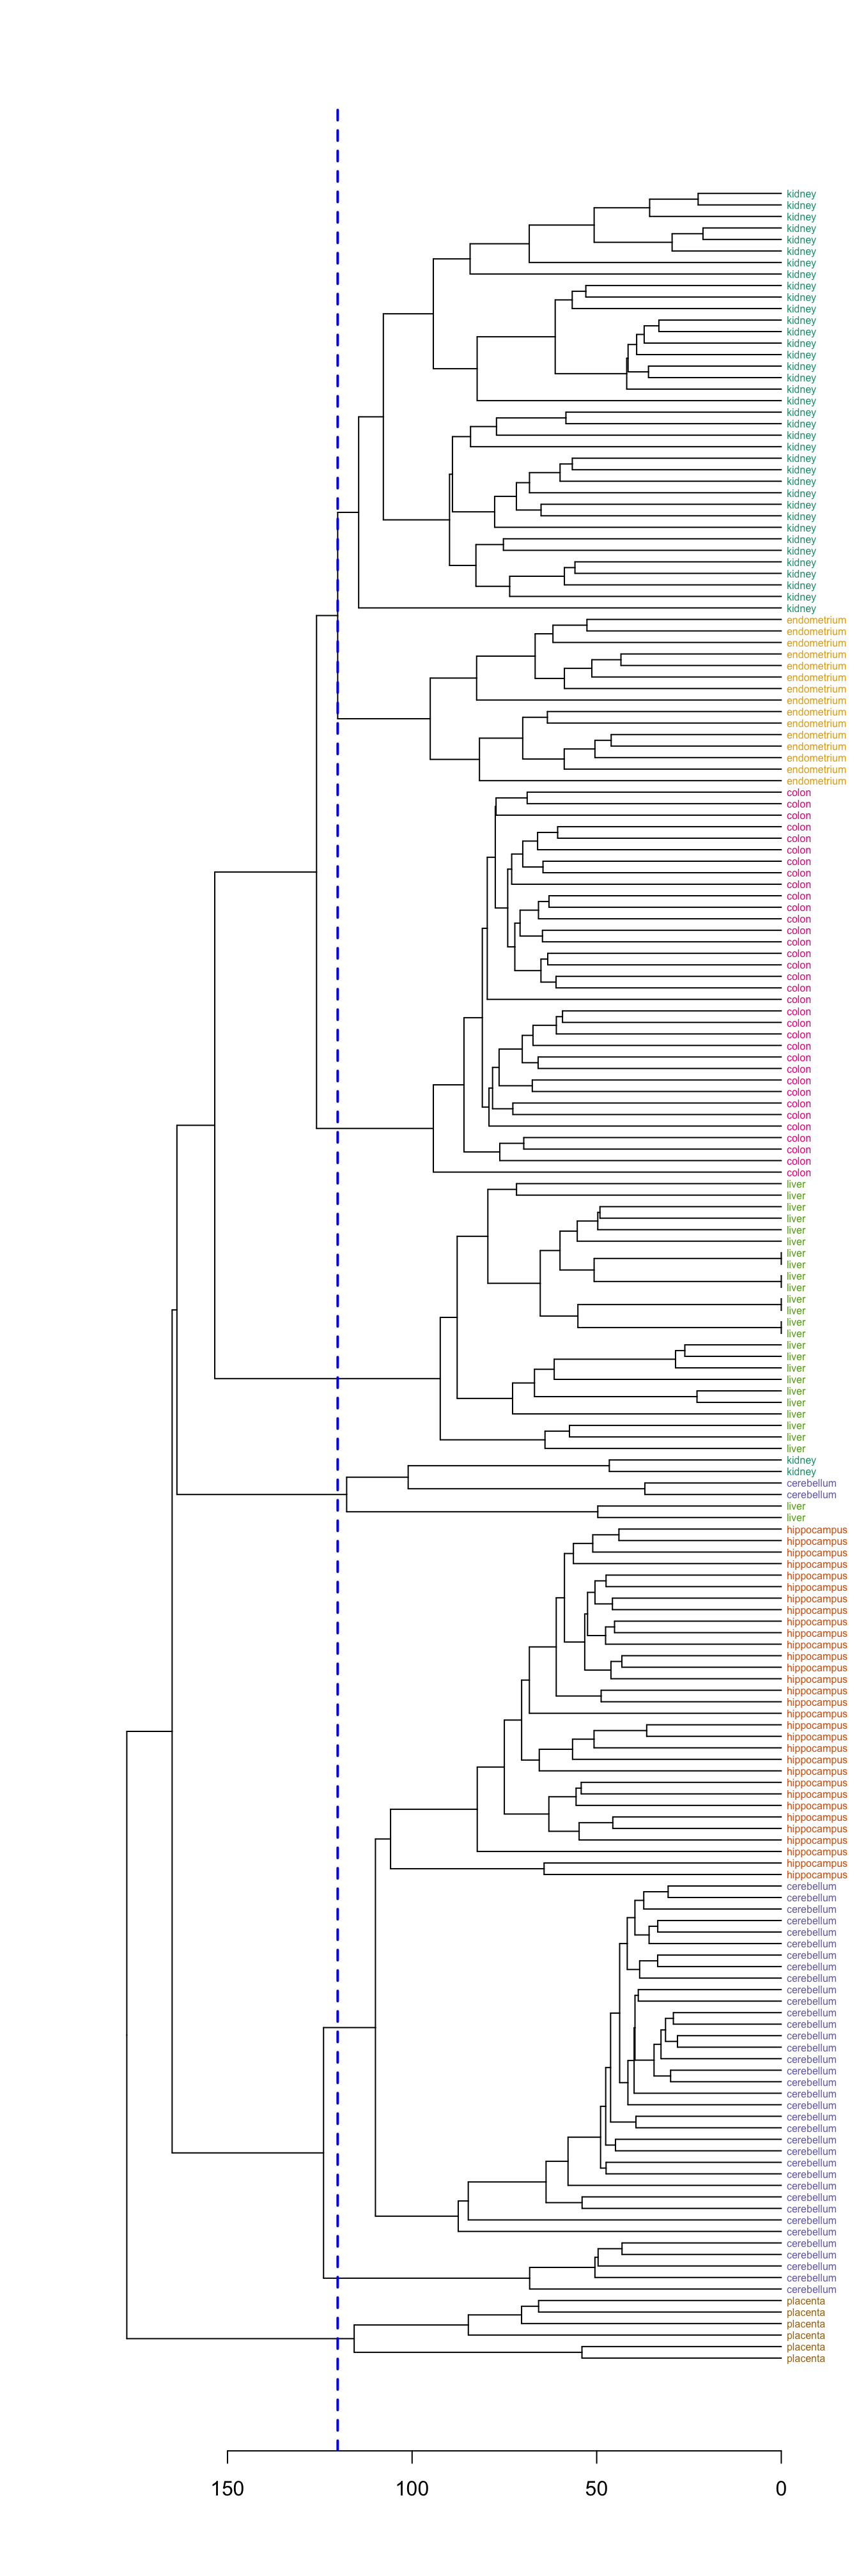 Selection of eight clusters from the dendogram